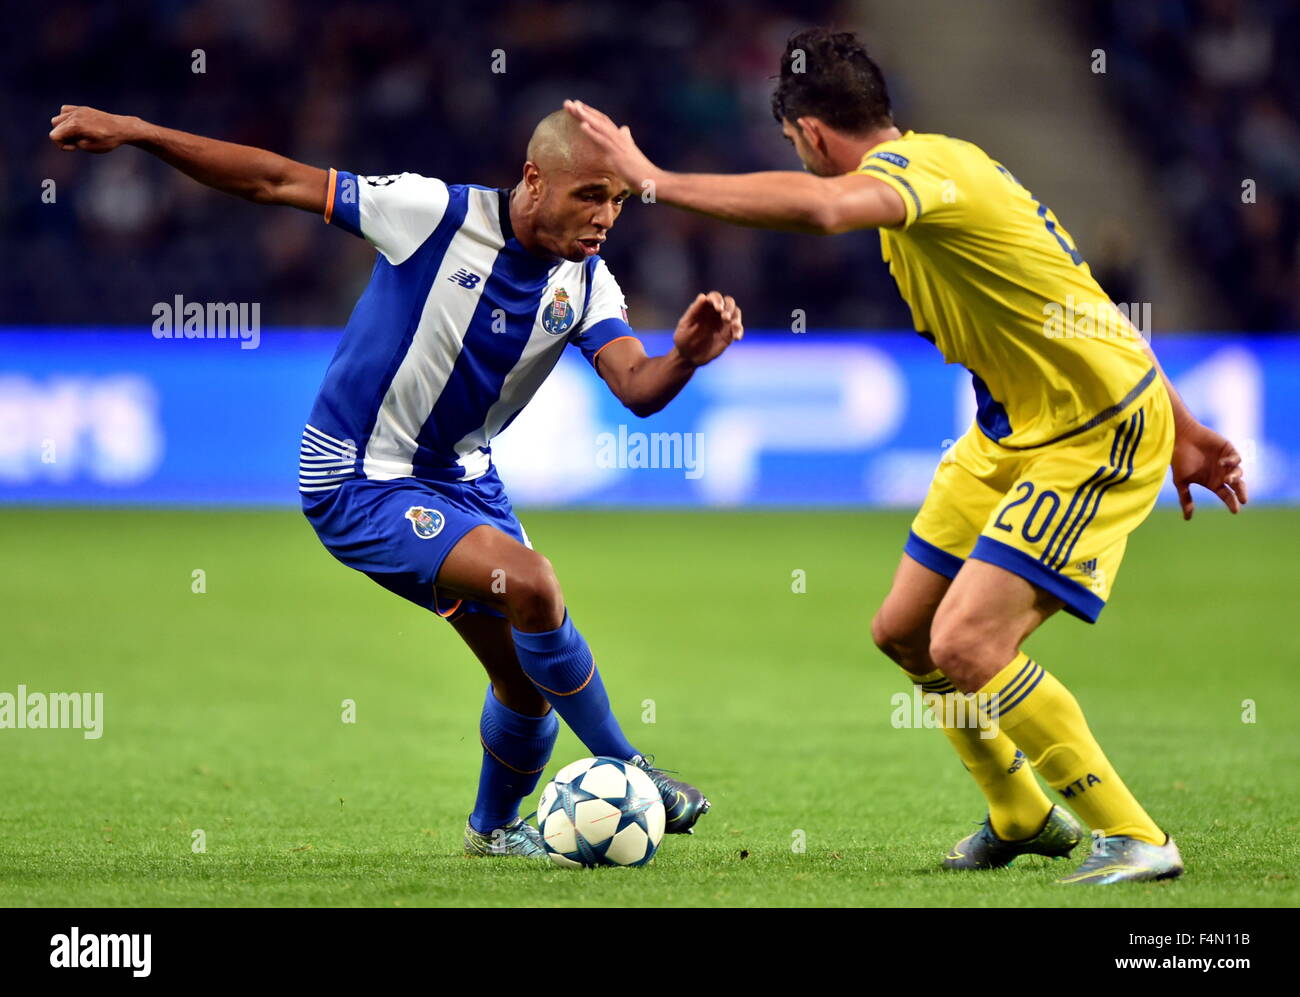 Porto, Portugal. 20th Oct, 2015. Yacine Brahimi (L) of Porto vies with a player of Maccabi Tel-Avivin during the UEFA Champions League group G football match, in Porto, Portugal, Oct. 20, 2015. Porto won 2-0. Credit:  Zhang Liyun/Xinhua/Alamy Live News Stock Photo